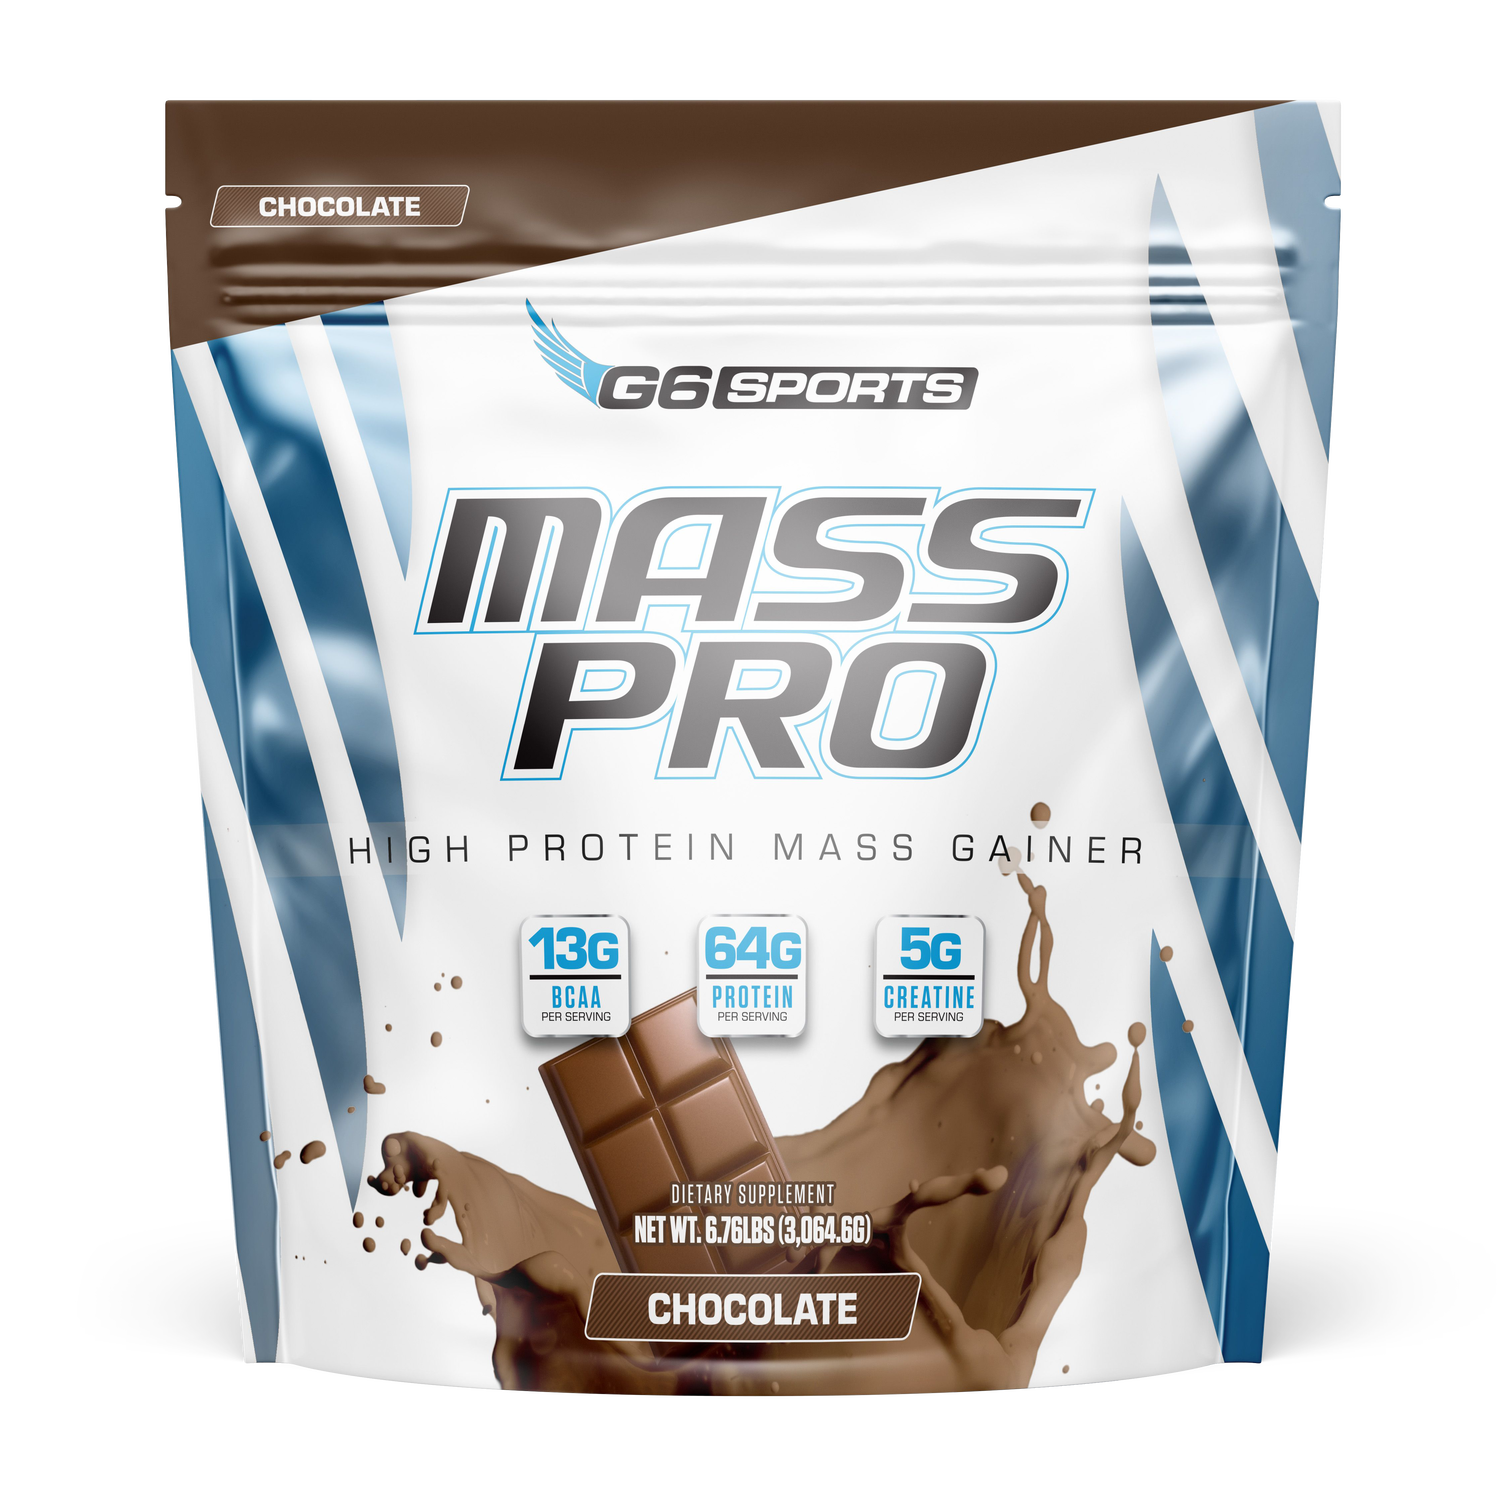 G6 Sports Mass Pro High Protein Mass Gainer- Chocolate (14 Servings) - 6.76 lbs.